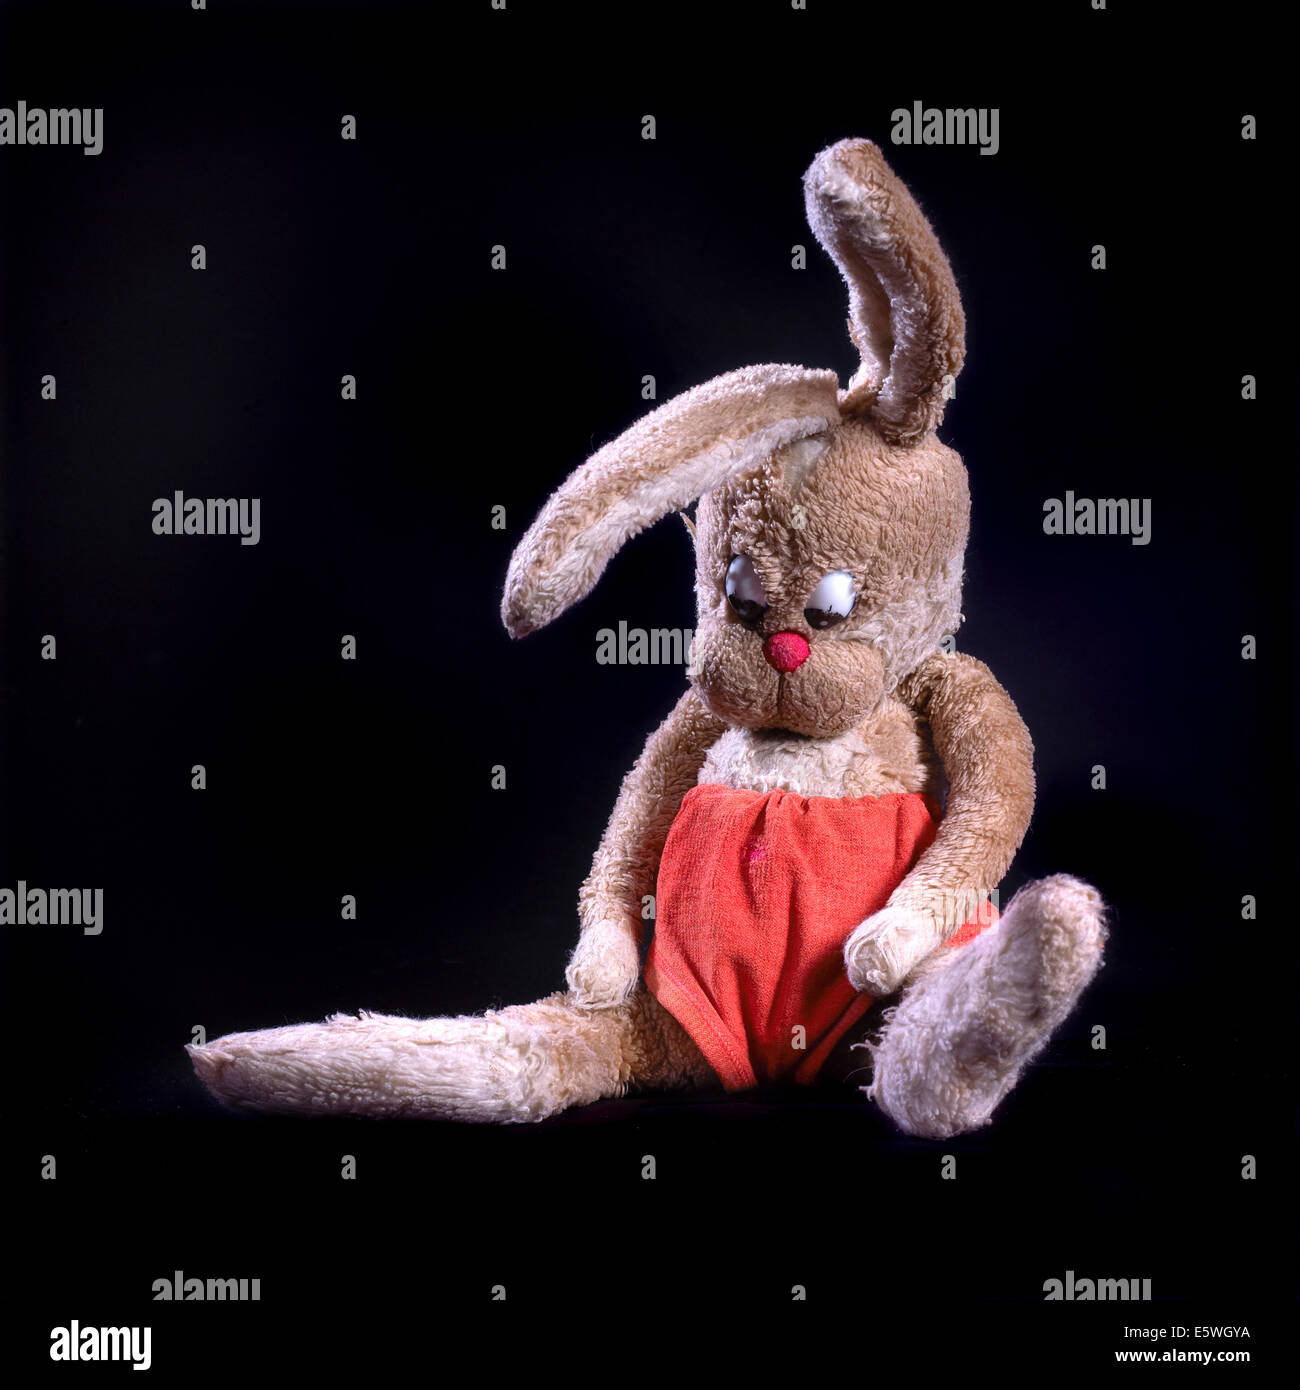 https://c8.alamy.com/comp/E5WGYA/studio-shot-of-old-worn-soft-toy-vintage-brown-rabbit-with-large-droopy-E5WGYA.jpg